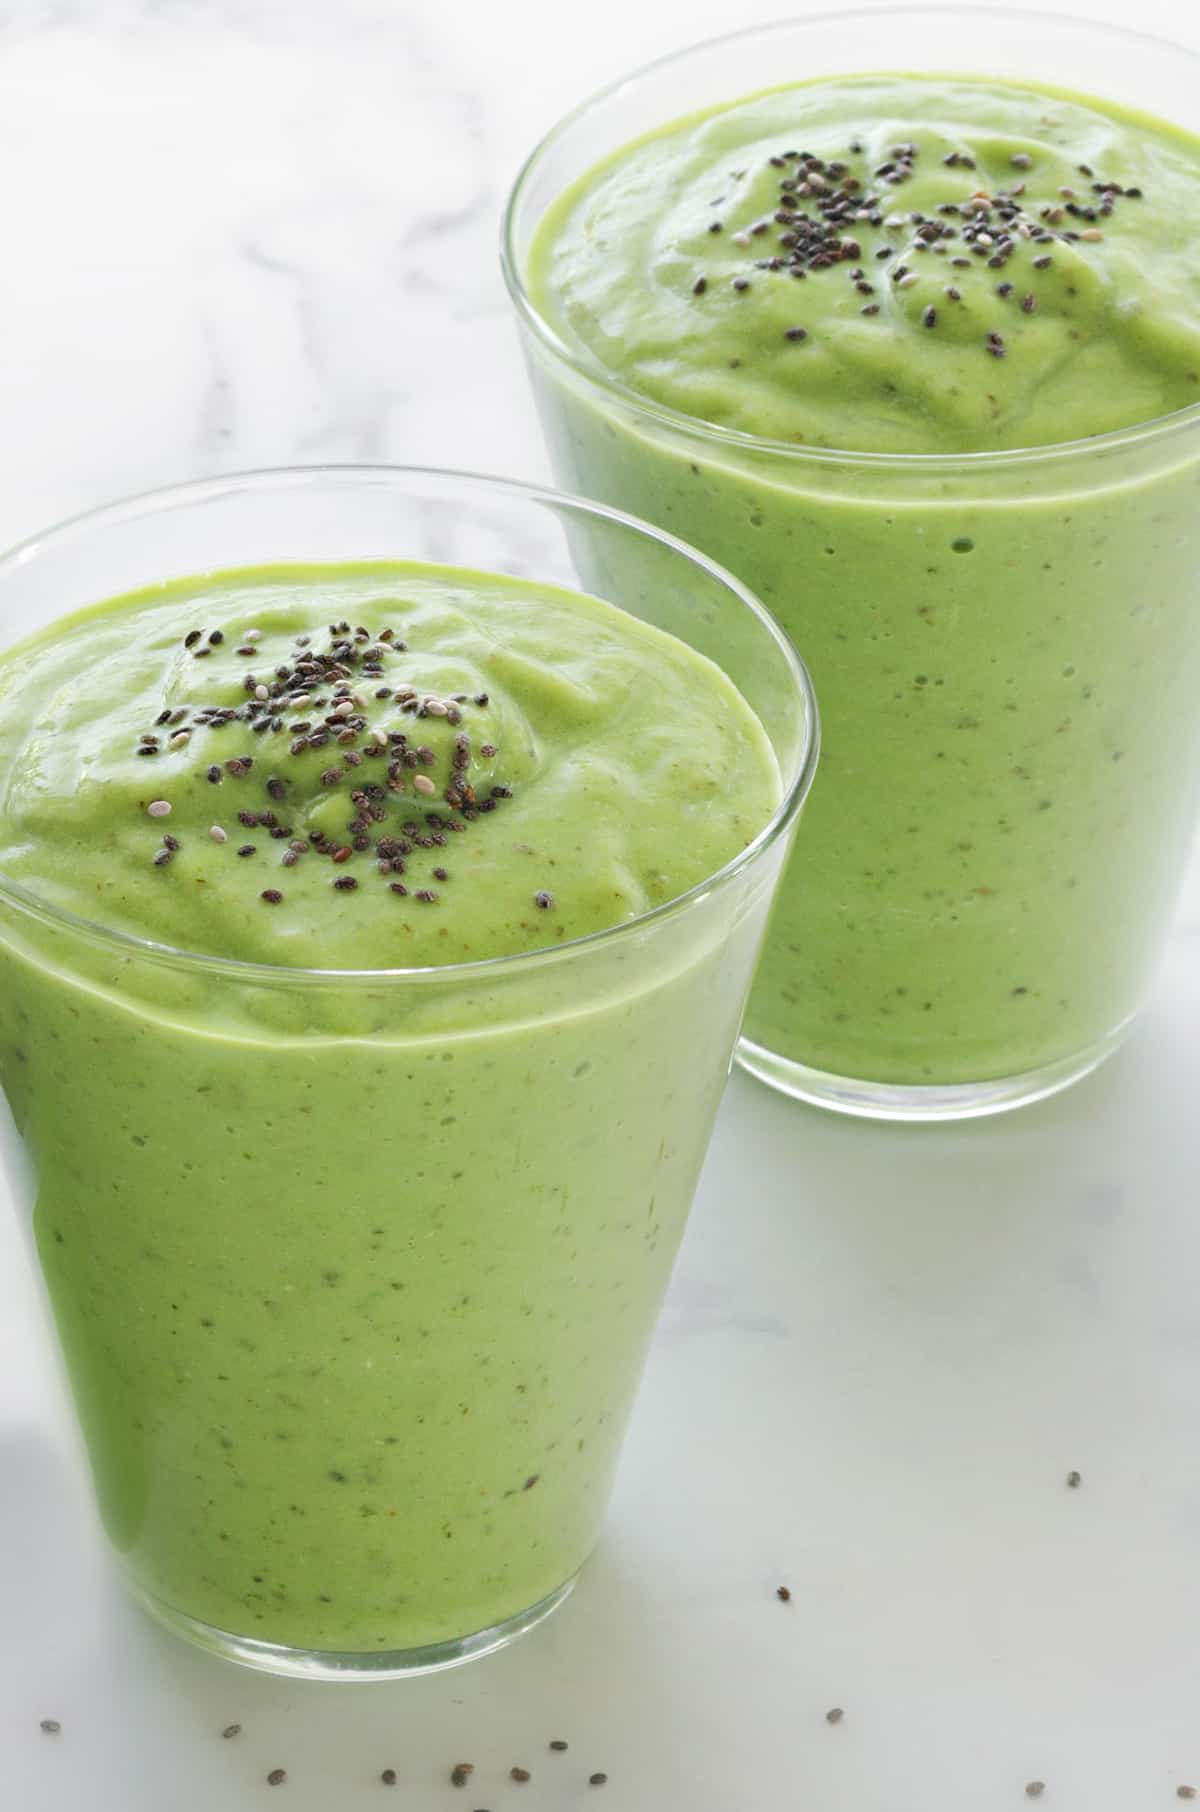 two green smoothies made with avocado and spinach placed on a white table